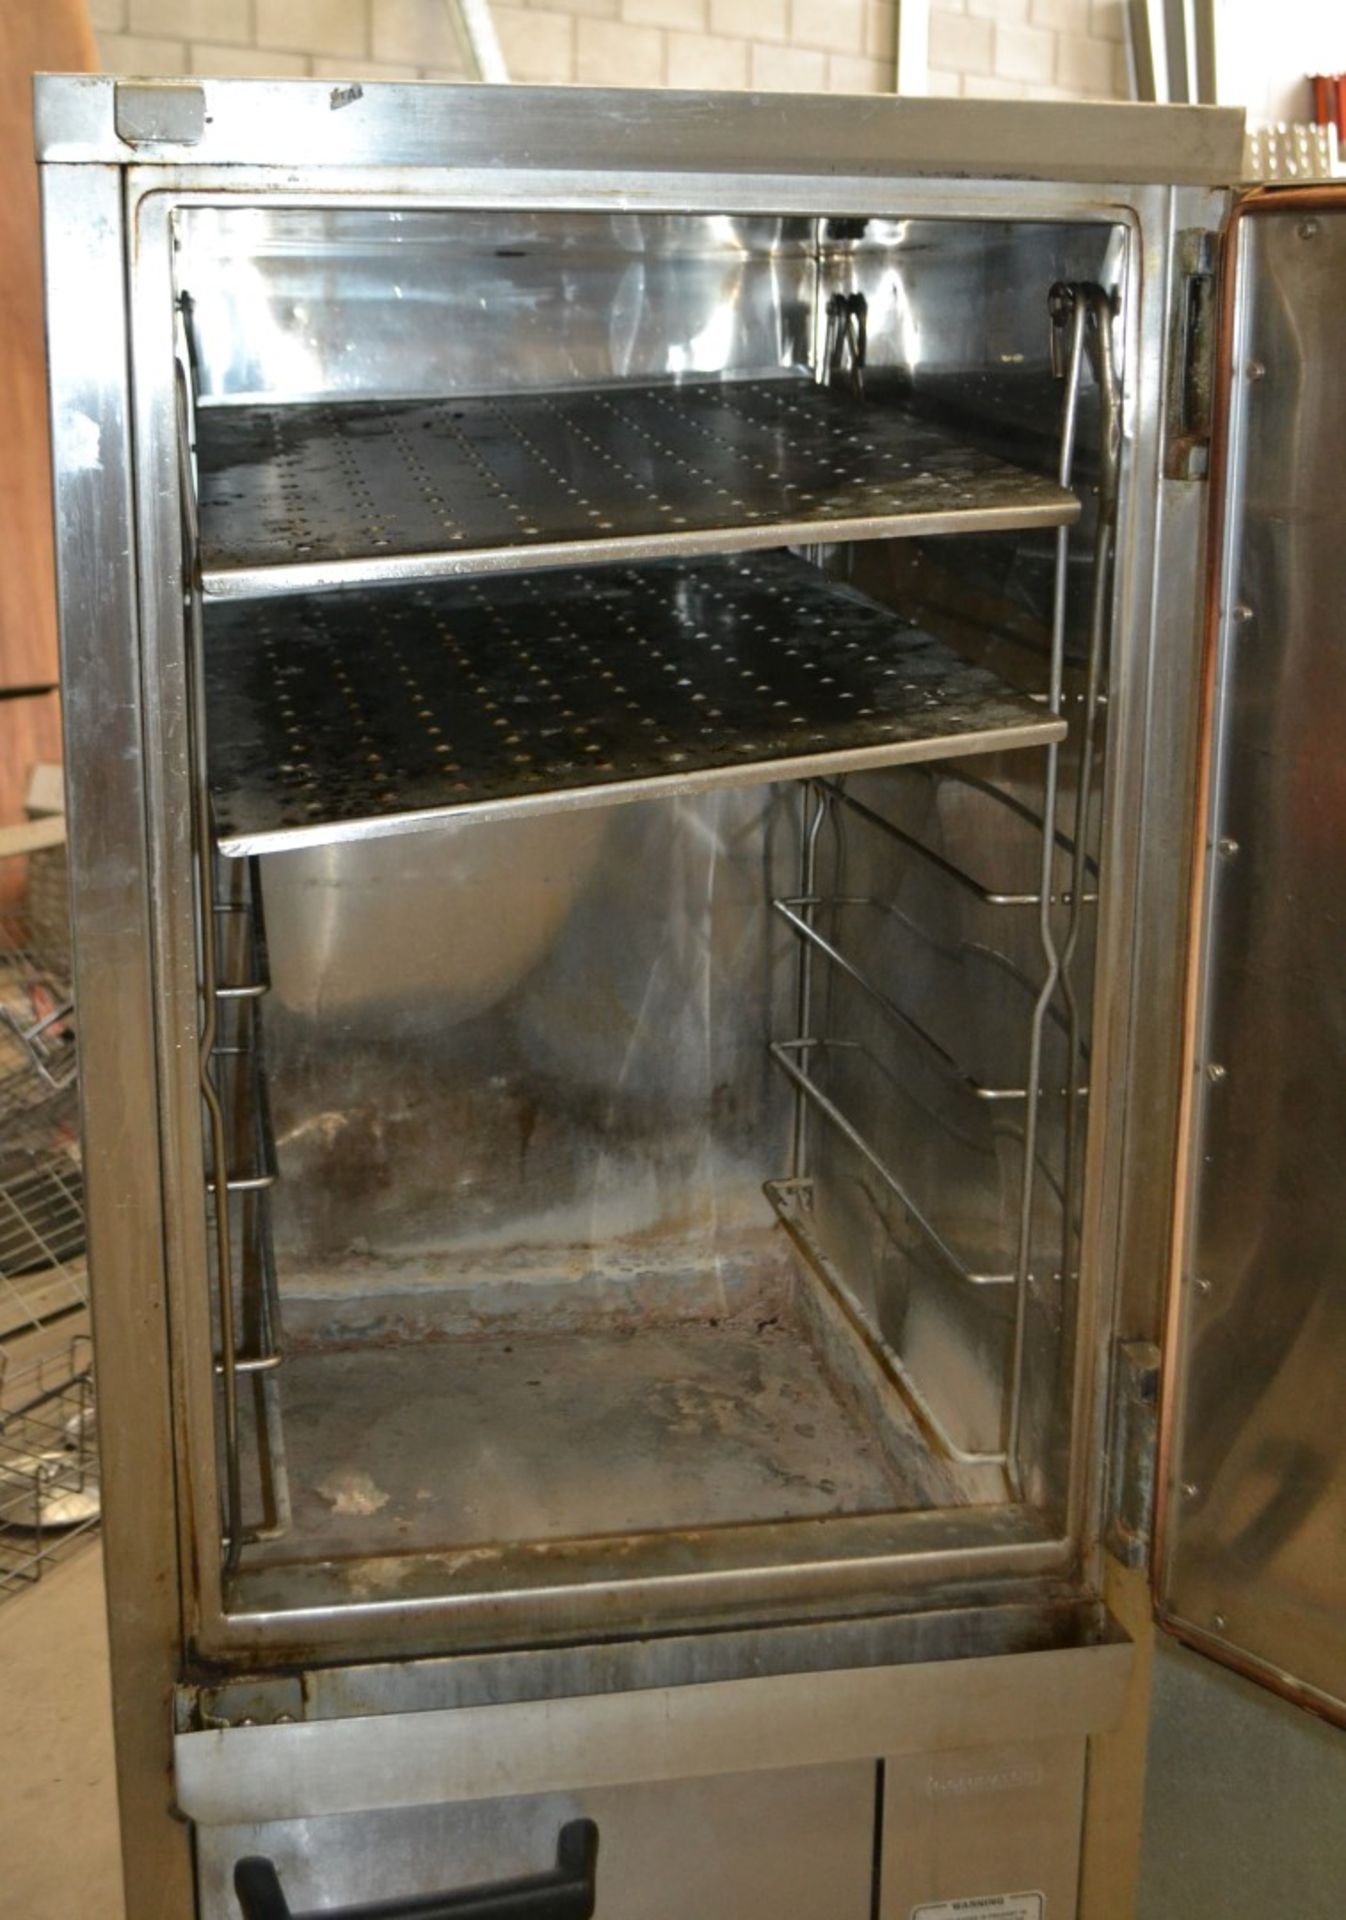 1 x Falcon Commercial Kitchen Steamer Oven - Natural Gas - Model G6478 - CL435 - Location: - Image 2 of 6